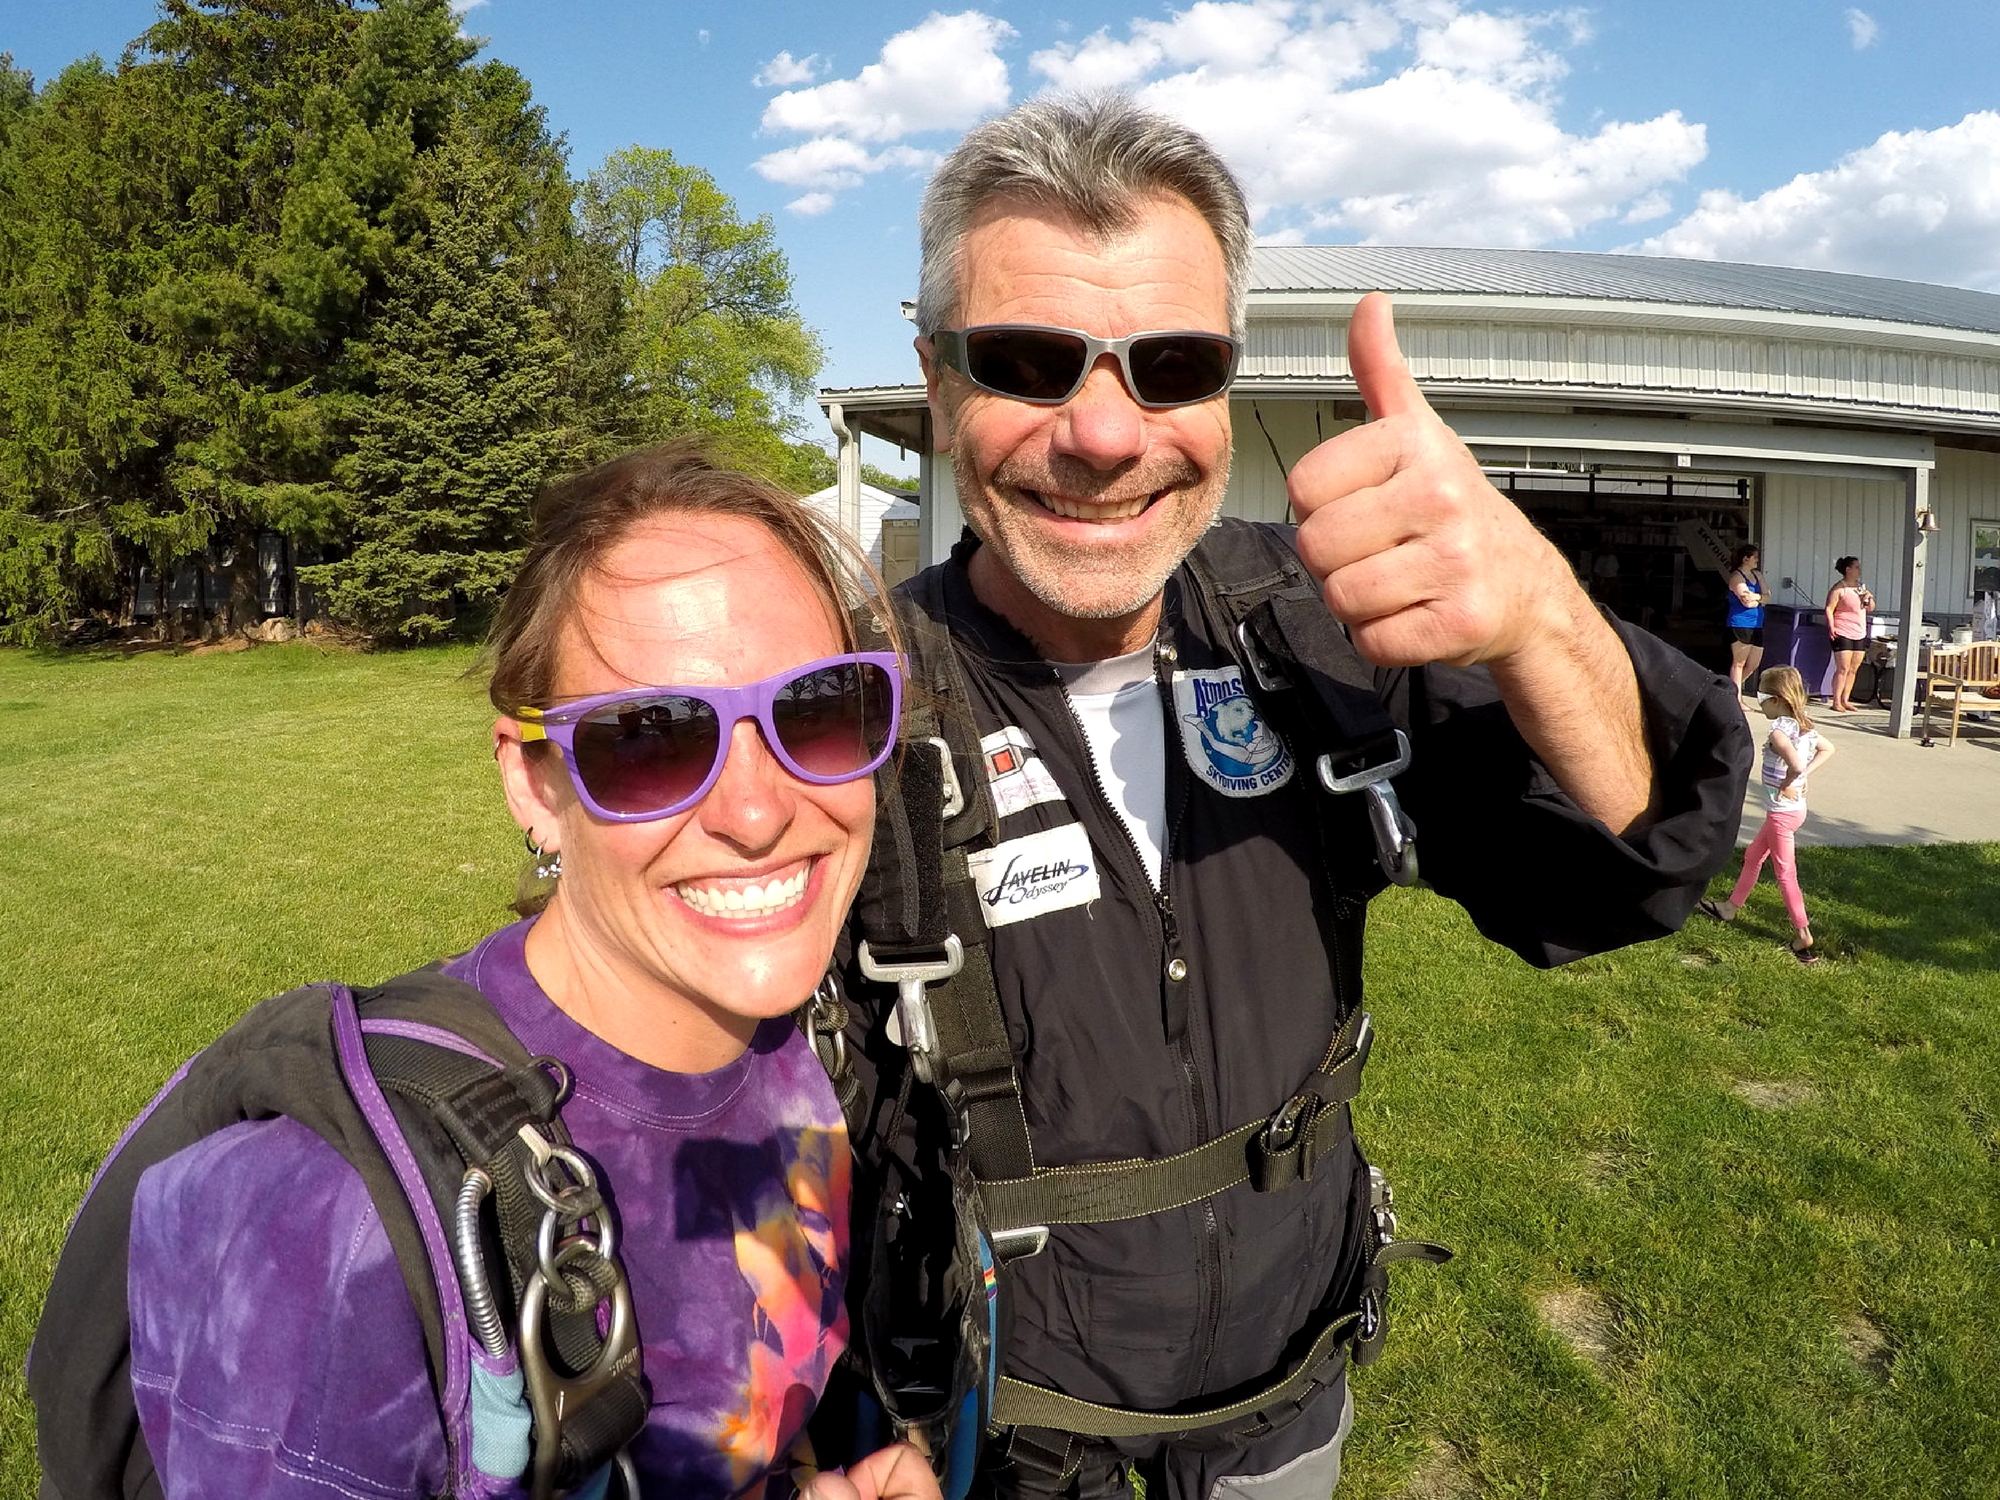 Bo gives a thumbs up before a safe skydive at Wisconsin Skydiving Center near Chicago